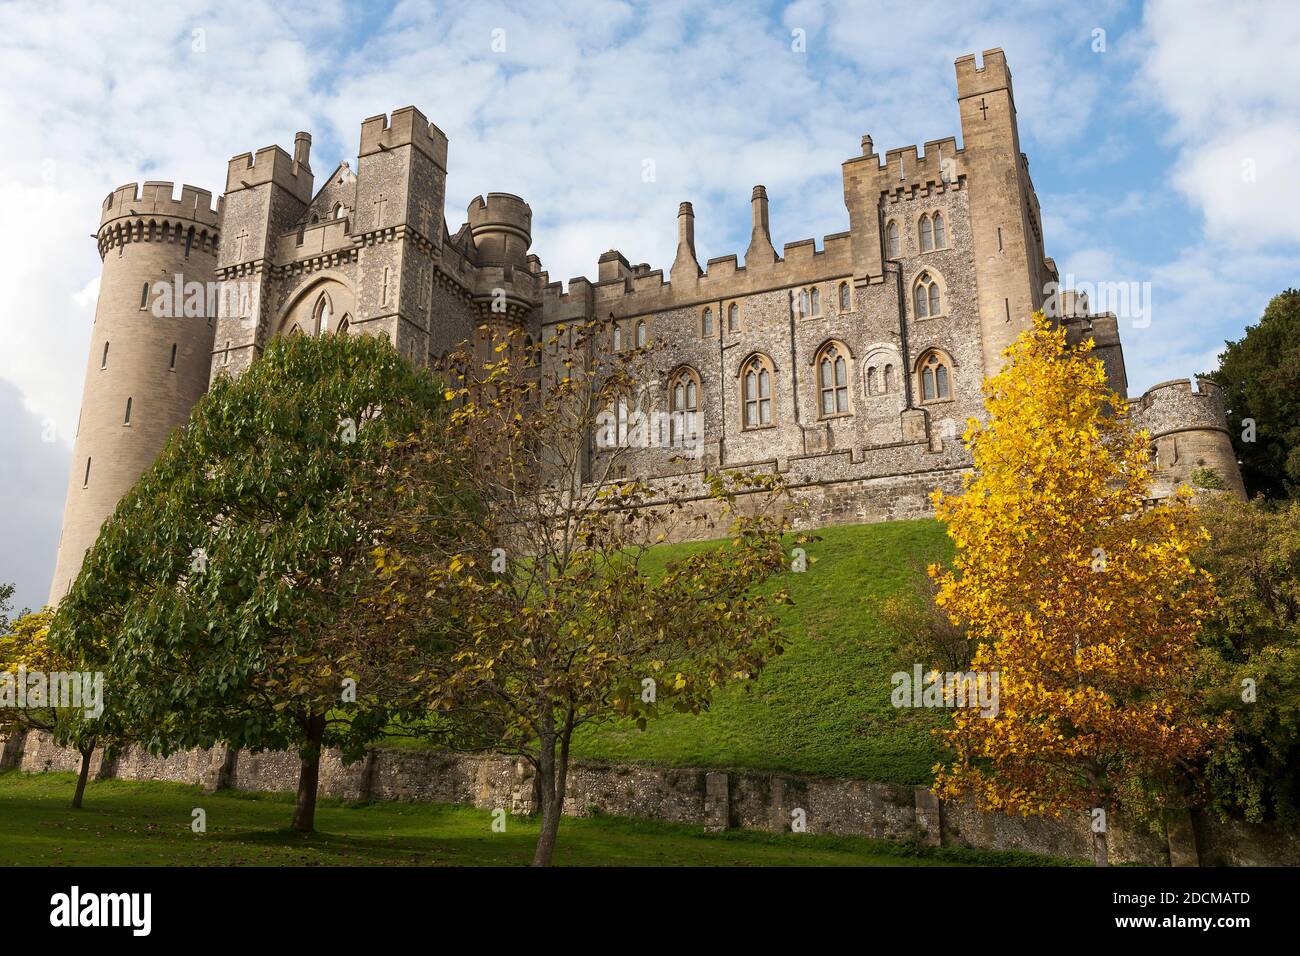 The south-east elevation of the spectacular Arundel Castle, Arundel, West Sussex, England, UK Stock Photo